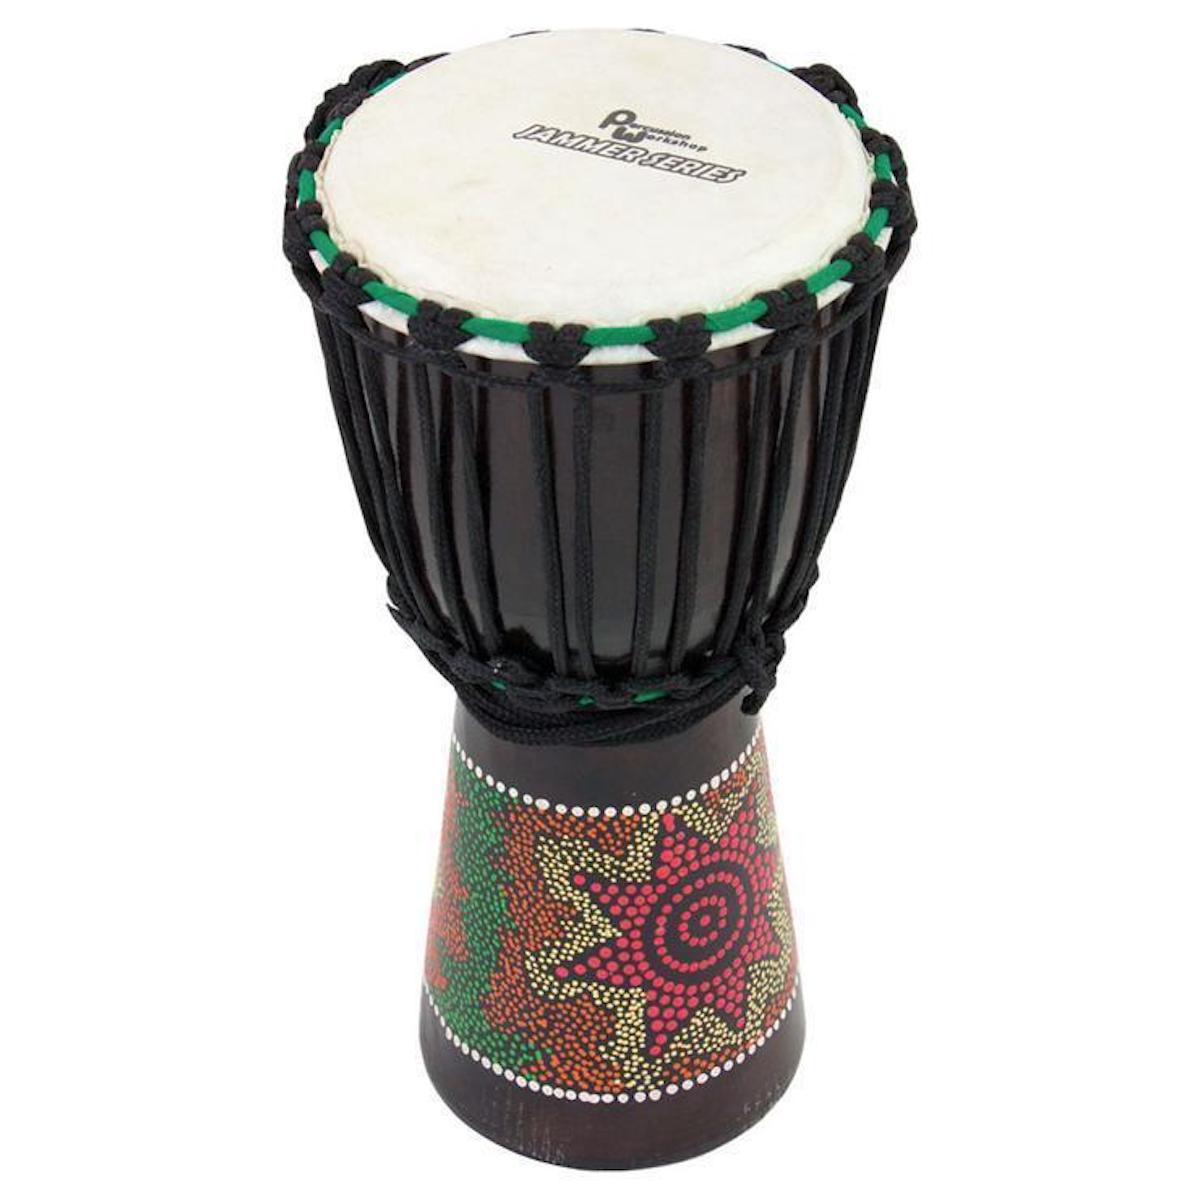 Percussion Workshop Jammer Djembe, 8" Head (various designs)